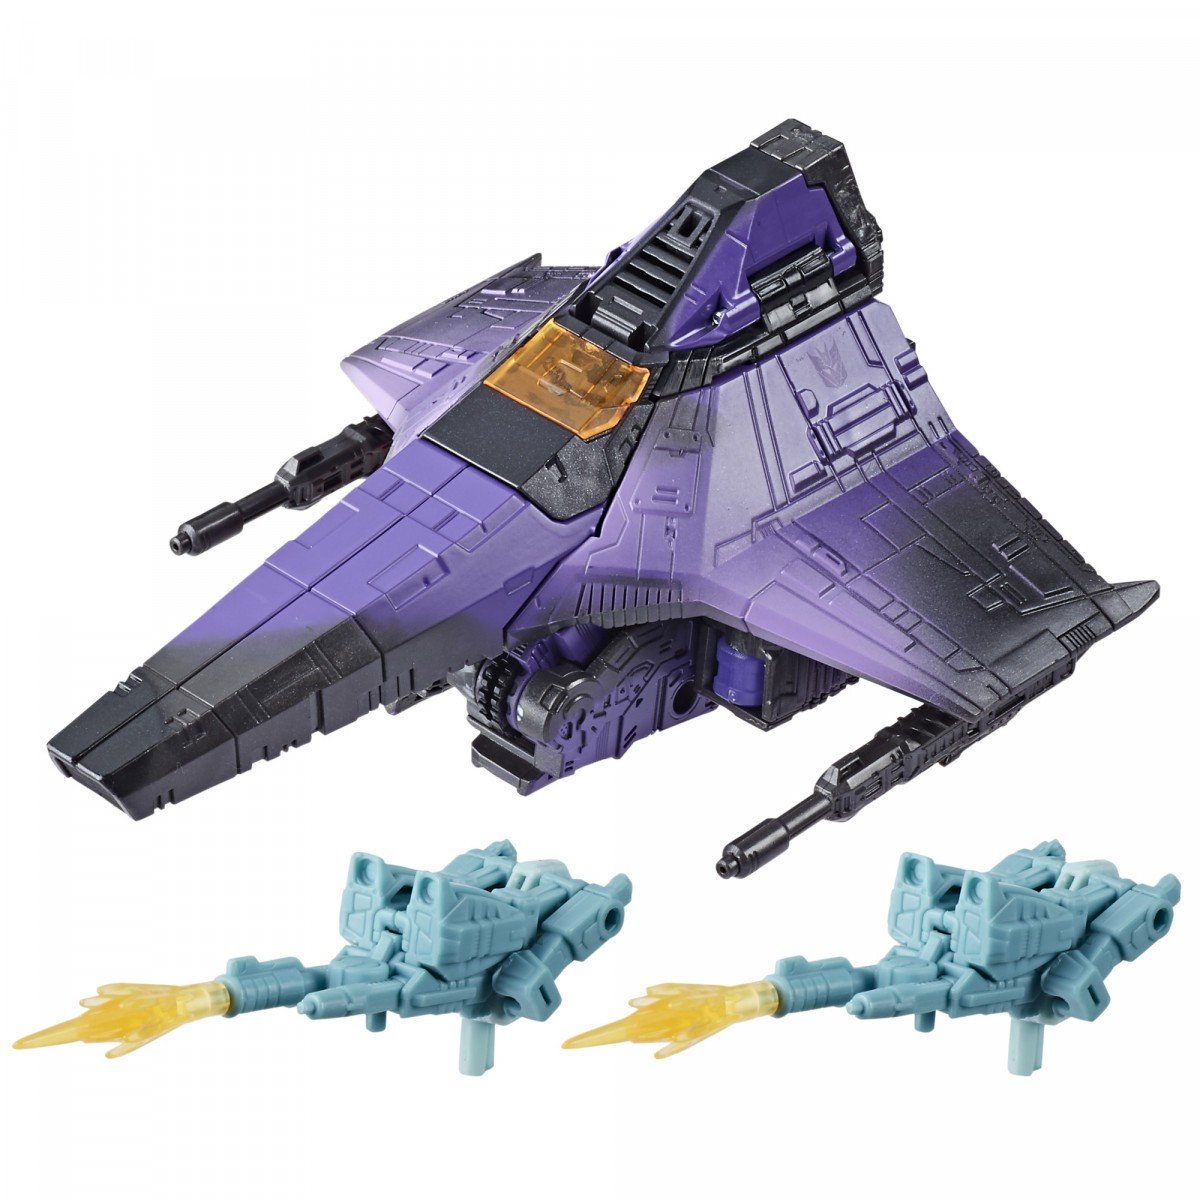 Hasbro - Transformers Generations - War for Cybertron: Trilogy - Voyager - Megatron & Hotlink (2-Pack)